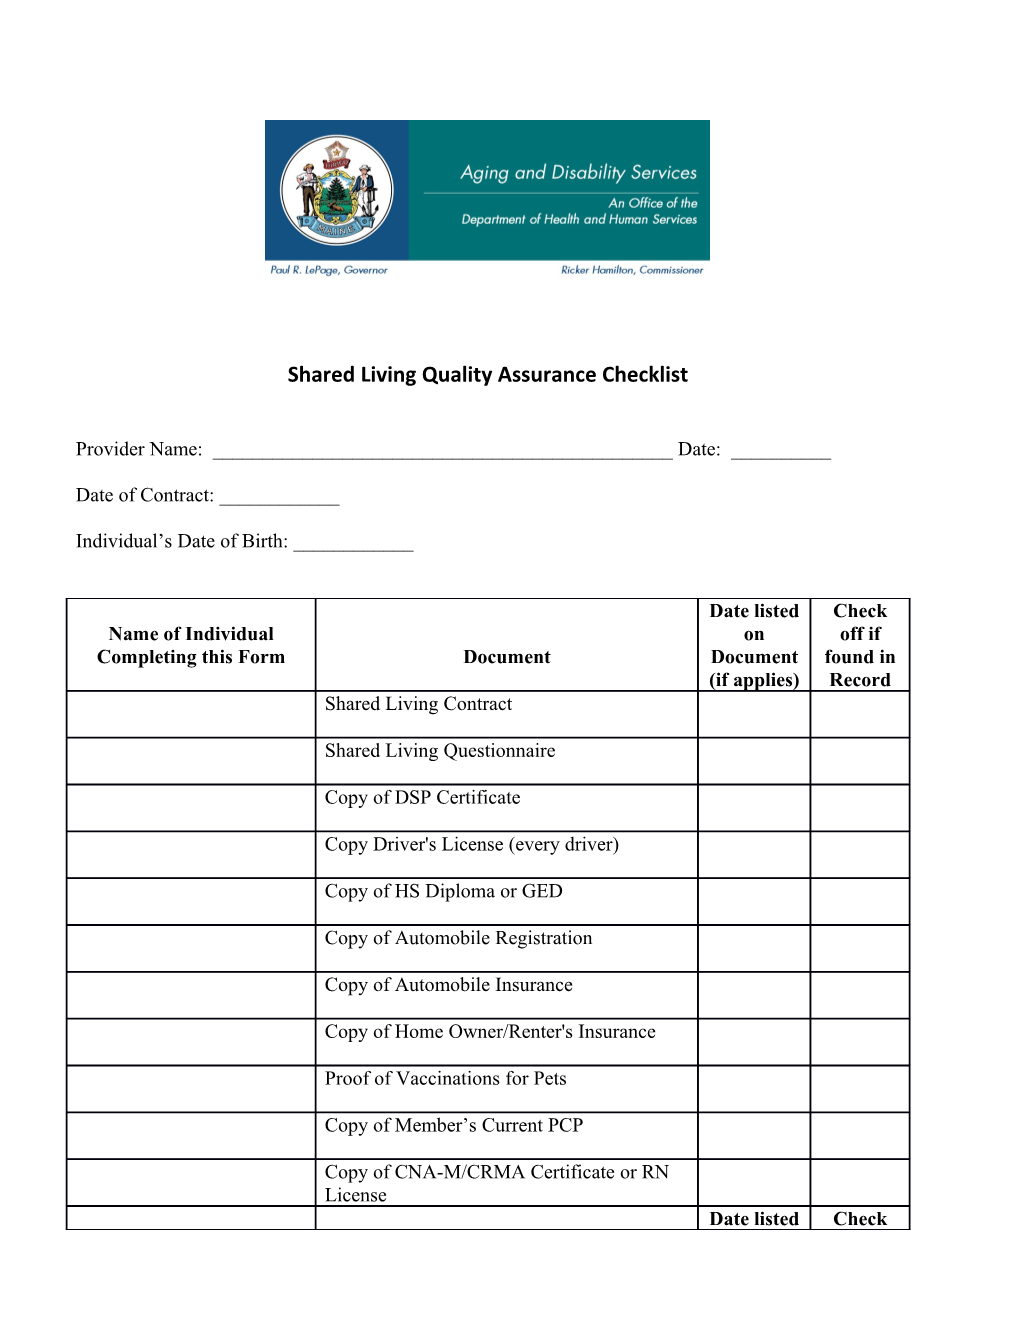 Shared Livingquality Assurance Checklist